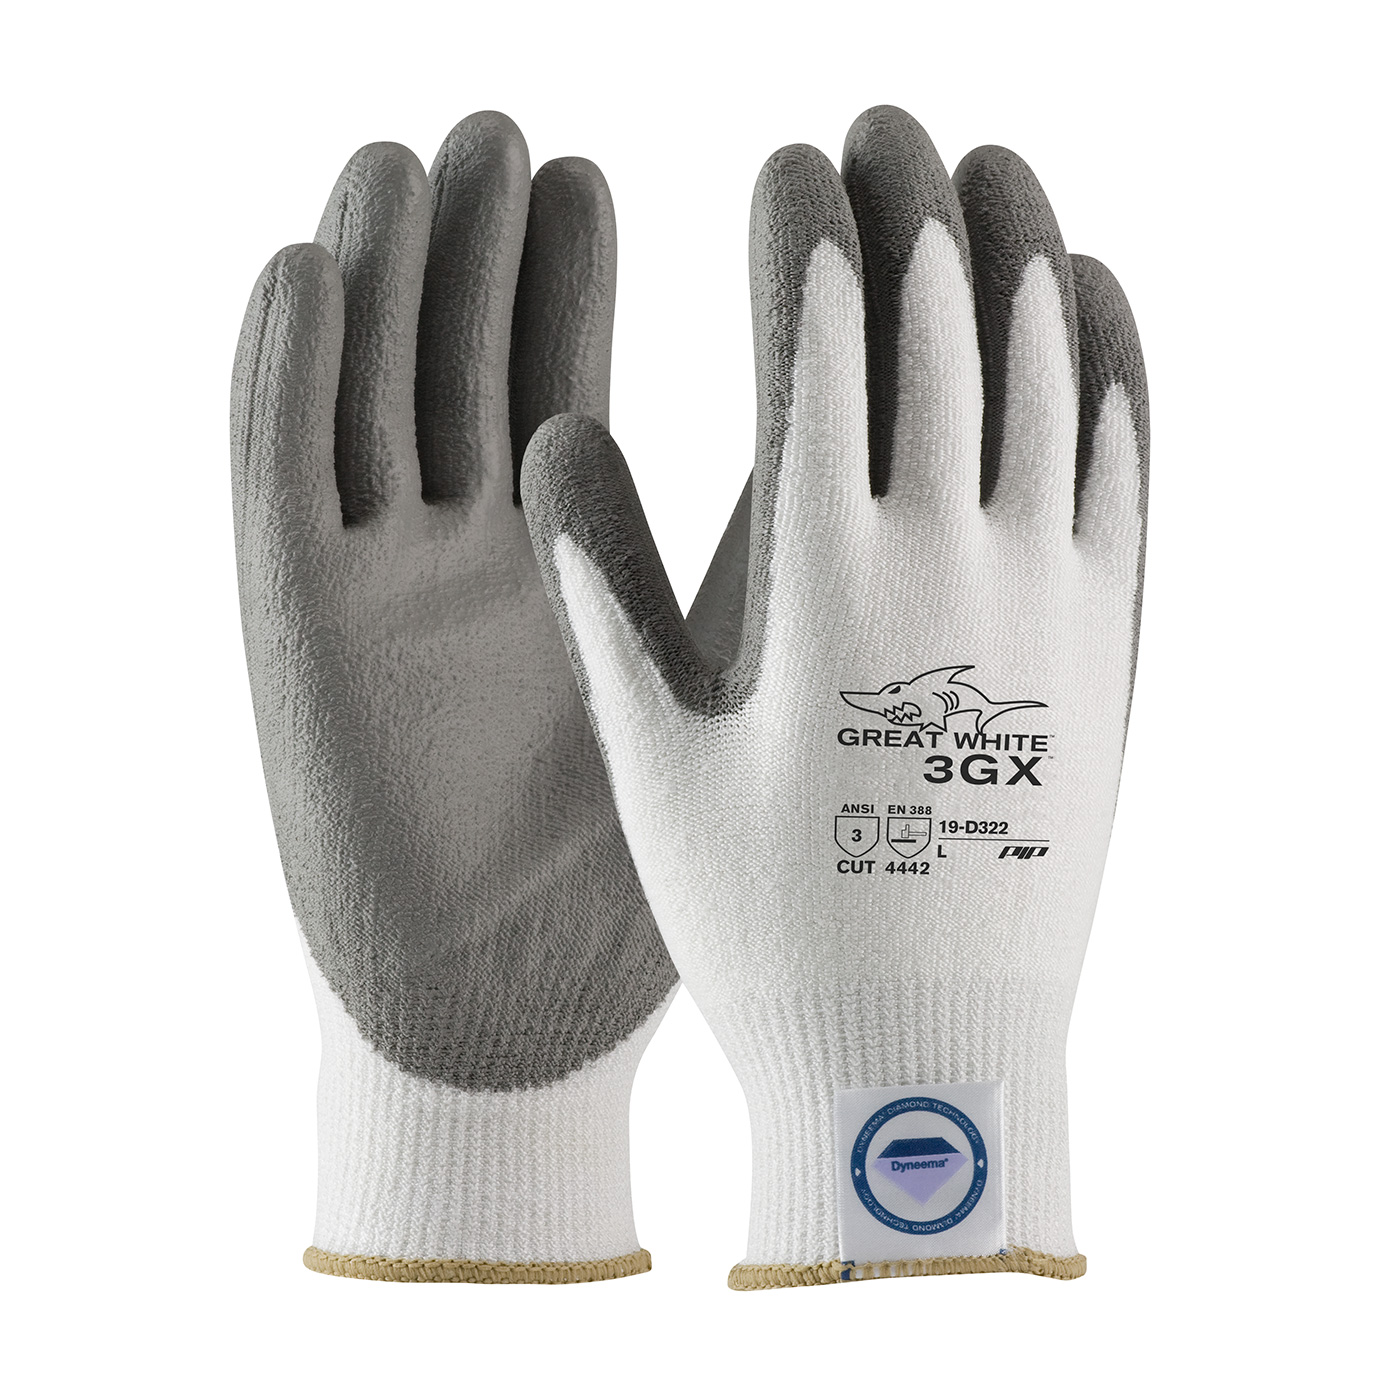 PIP 19-D322/XL Great White 3GX Seamless Knit Dyneema Diamond Blended Glove with Polyurethane Coated Smooth Grip on Palm & Fingers - X-Large PID-19 D322 XL